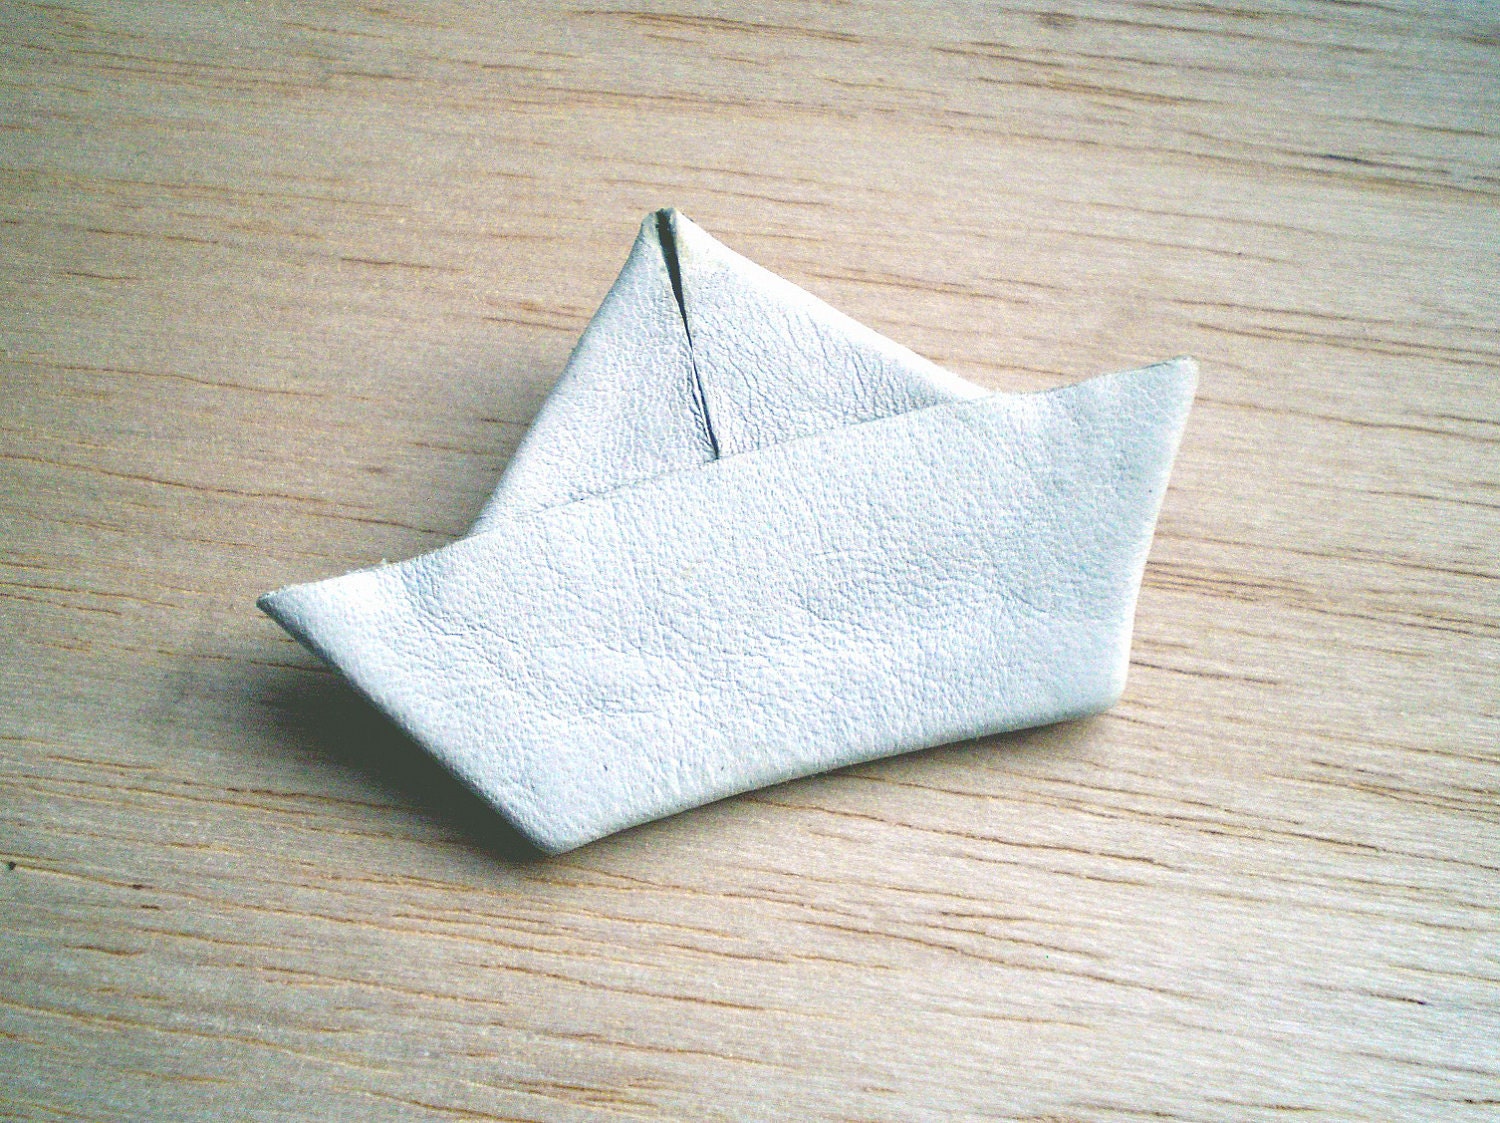 White paper boat pin, made of leather.